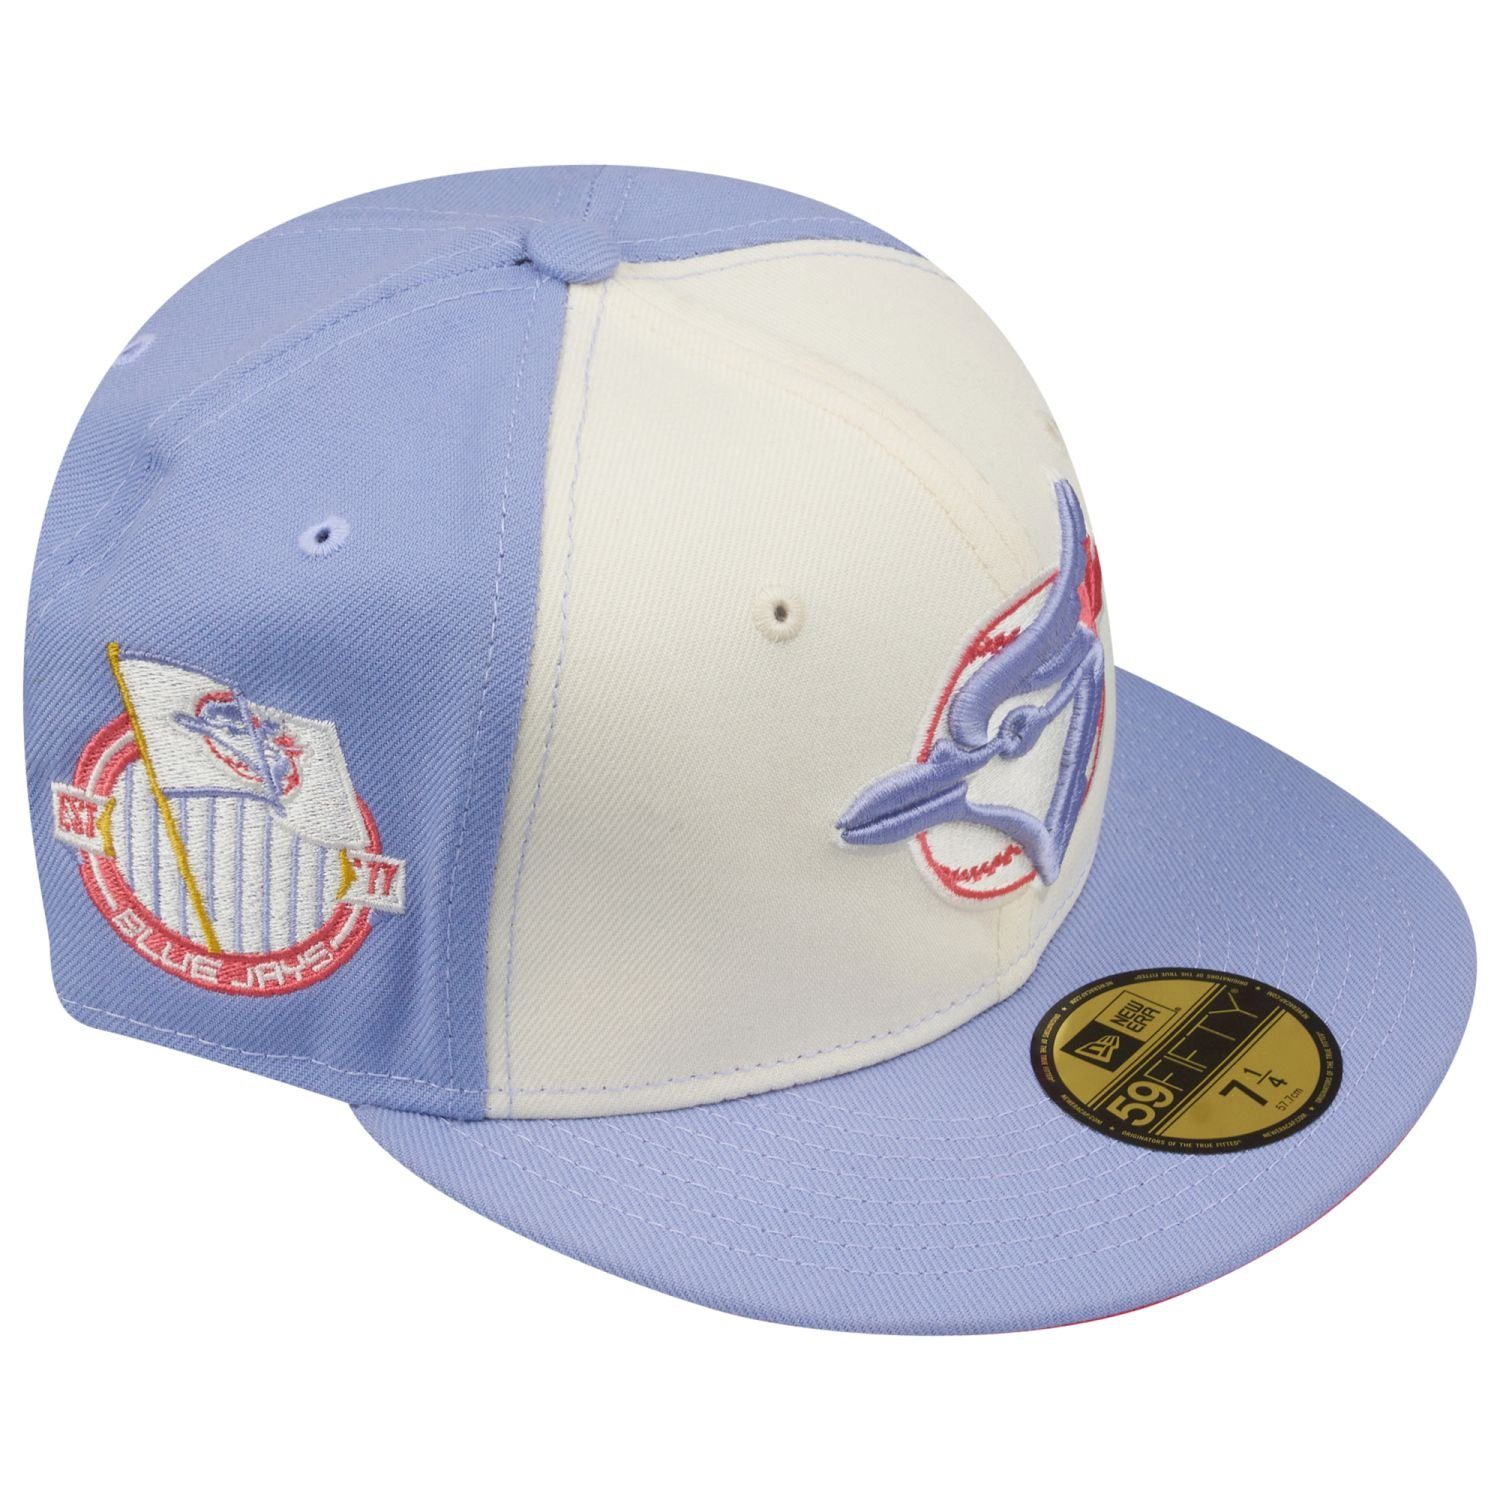 Jays COOPERSTOWN Toronto Era New Cap Fitted 59Fifty